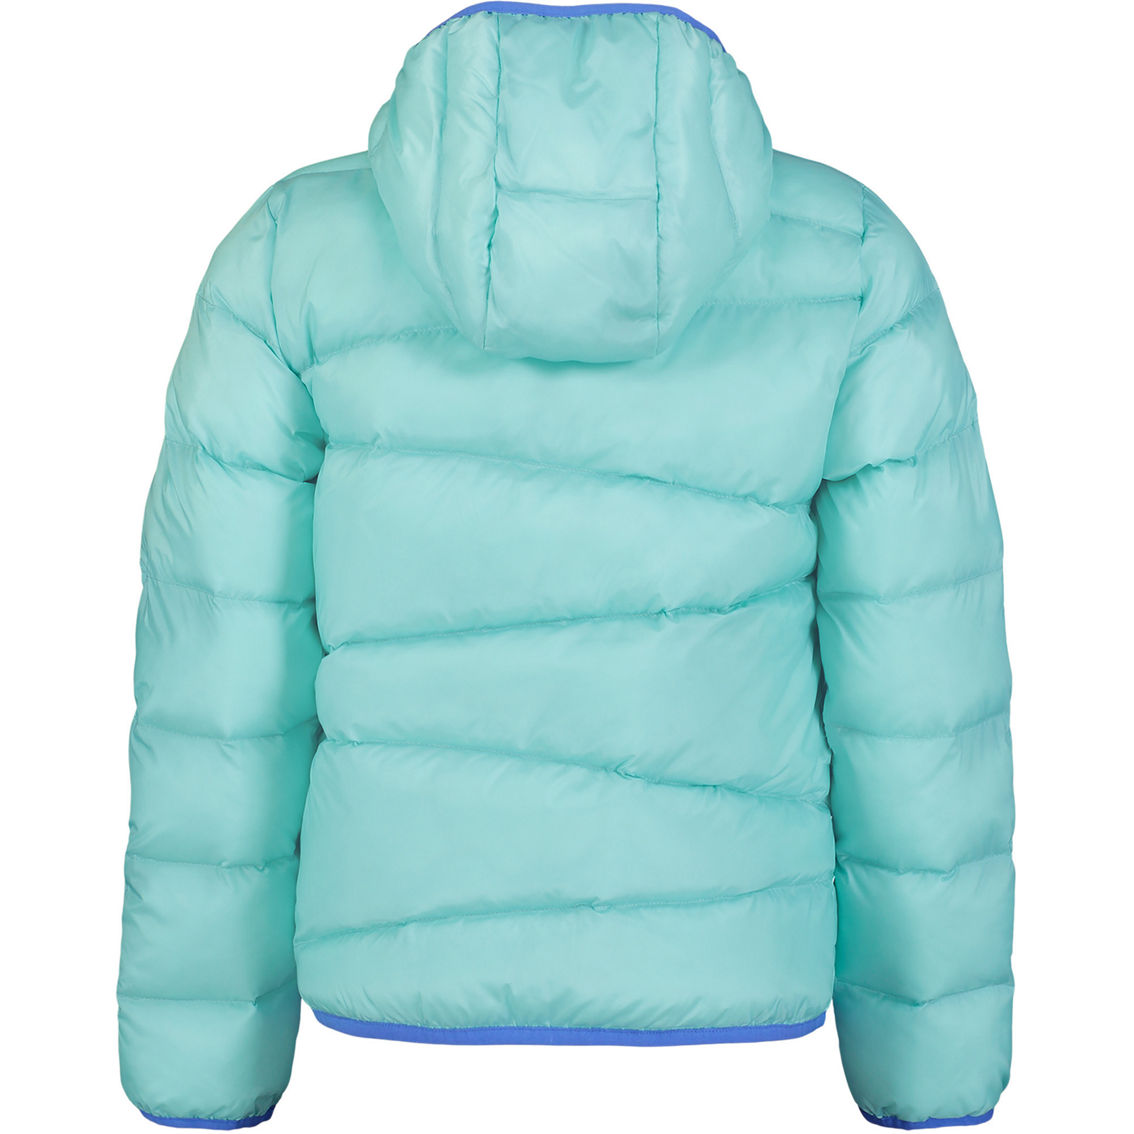 Under Armour Girls Prime Puffer Jacket - Image 2 of 2